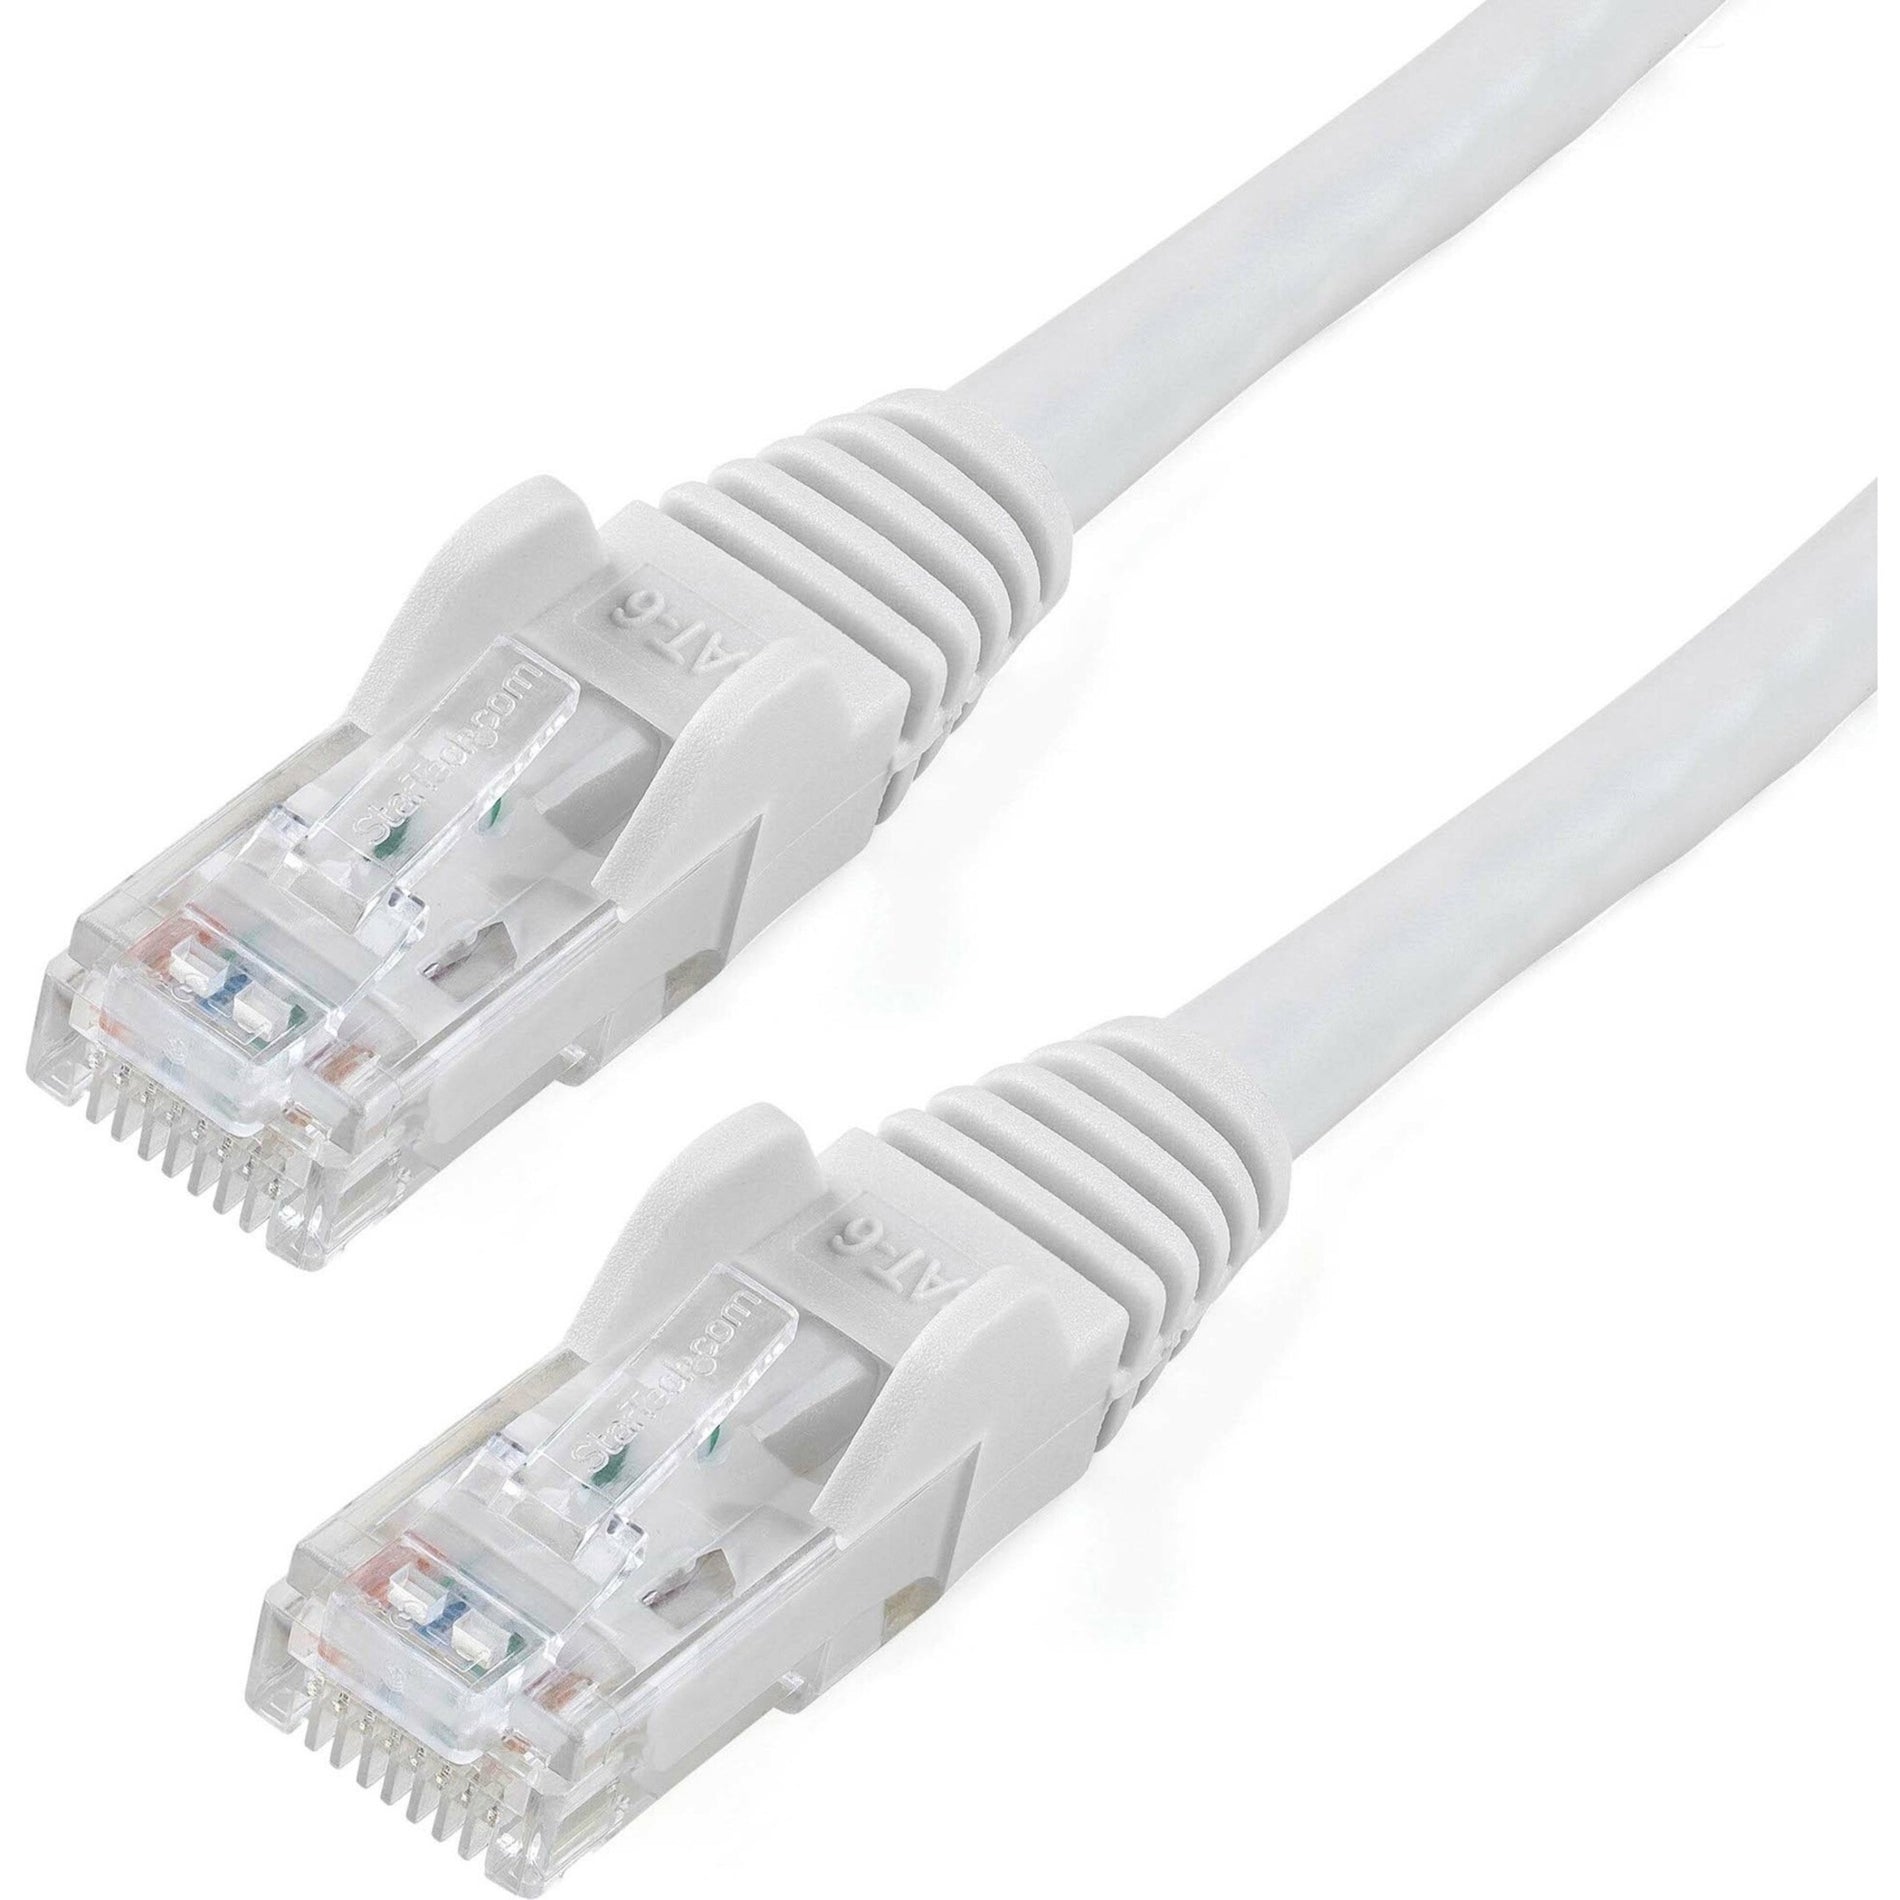 StarTech.com N6PATCH7WH 7 ft White Snagless Cat6 UTP Patch Cable Lifetime Warranty ETL Verified スタートレック・ドットコム N6PATCH7WH 7 フィート ホワイト スナッグレス Cat6 UTP パッチケーブル、終身保証、ETL 検証済み